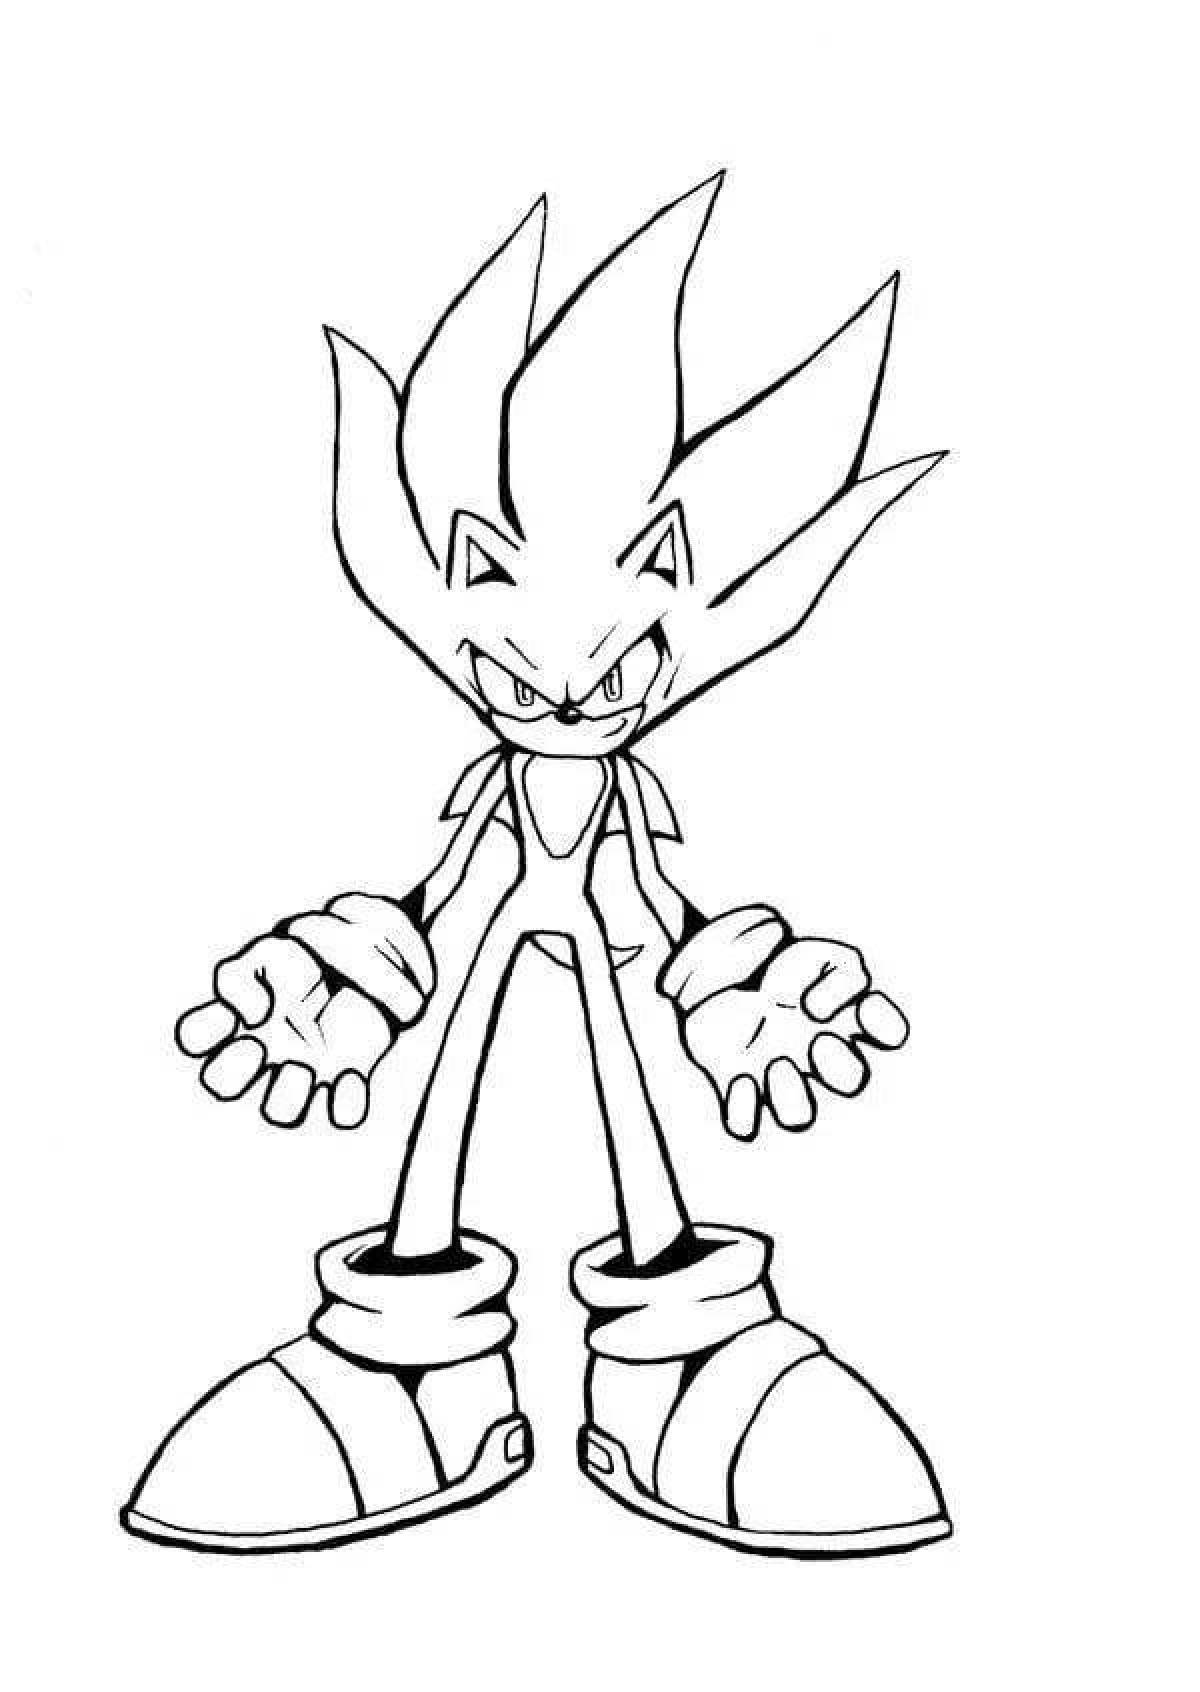 Charming super sonic coloring book